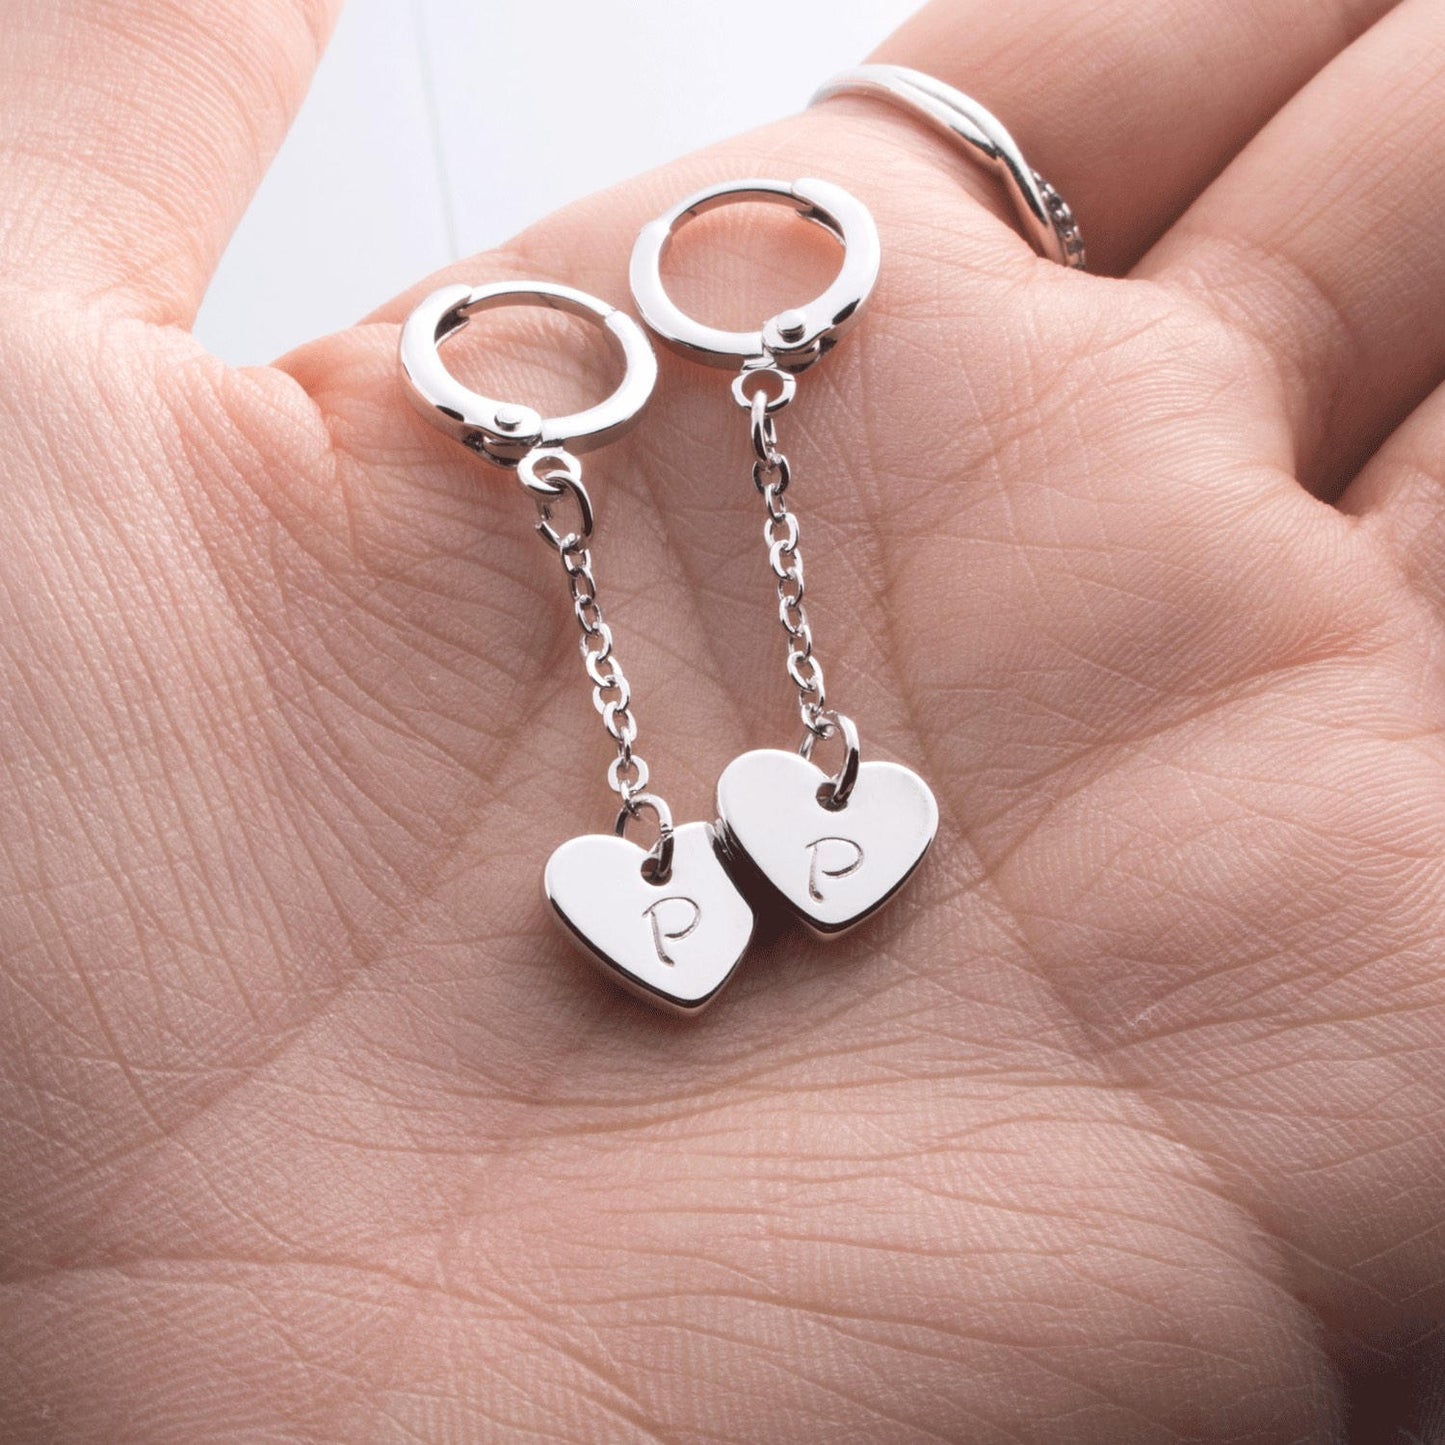 Buy Personalized Heart Clip Initial Earrings - Customized Jewelry at Petite Boutique